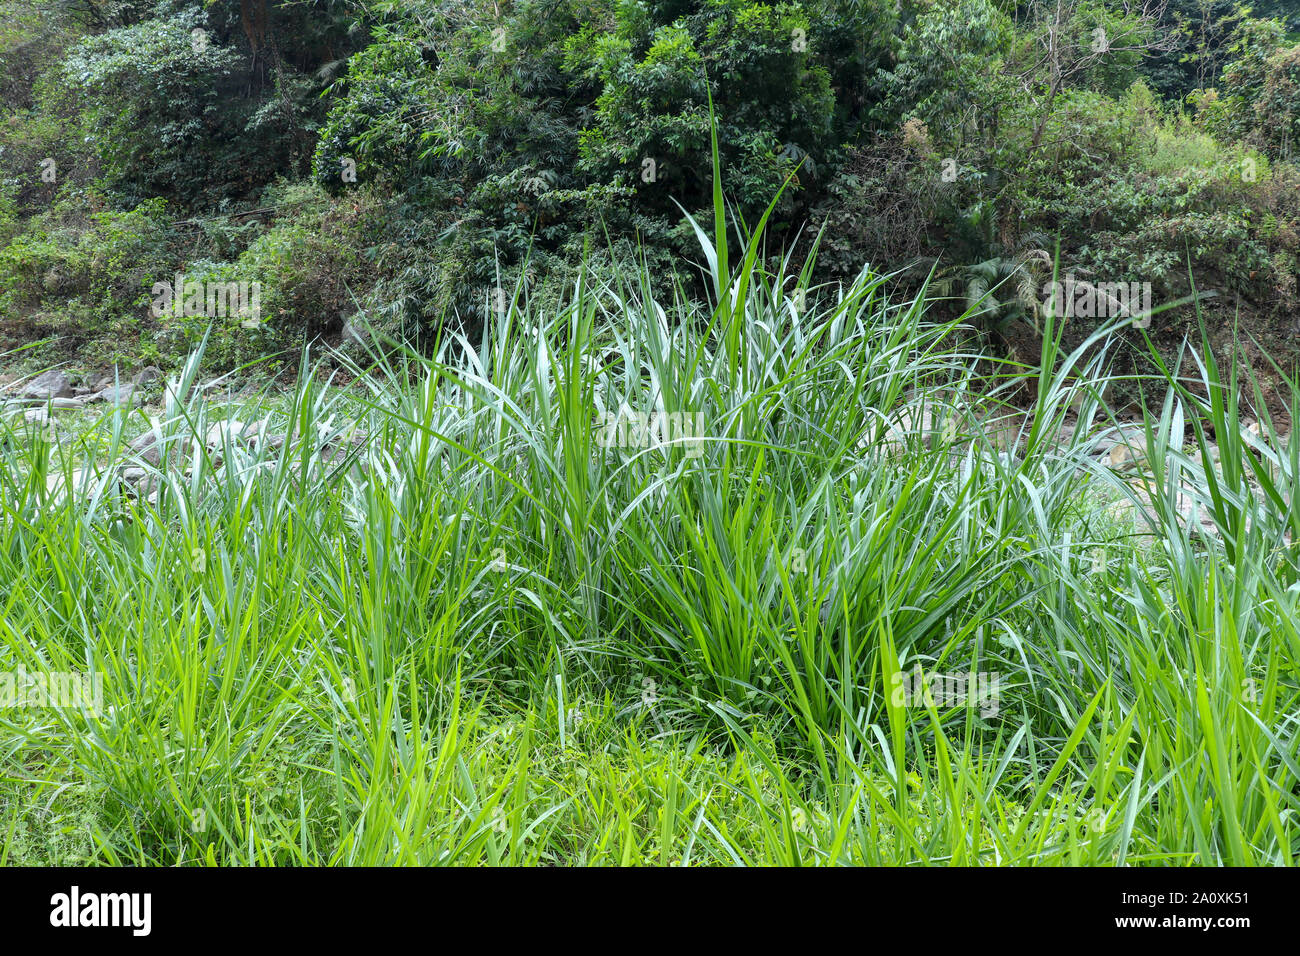 Tall grass on the shore of a mountain river. Large clumps of grass with slender long leaves, fresh green color. Sunlight is reflected in vegetation. Stock Photo